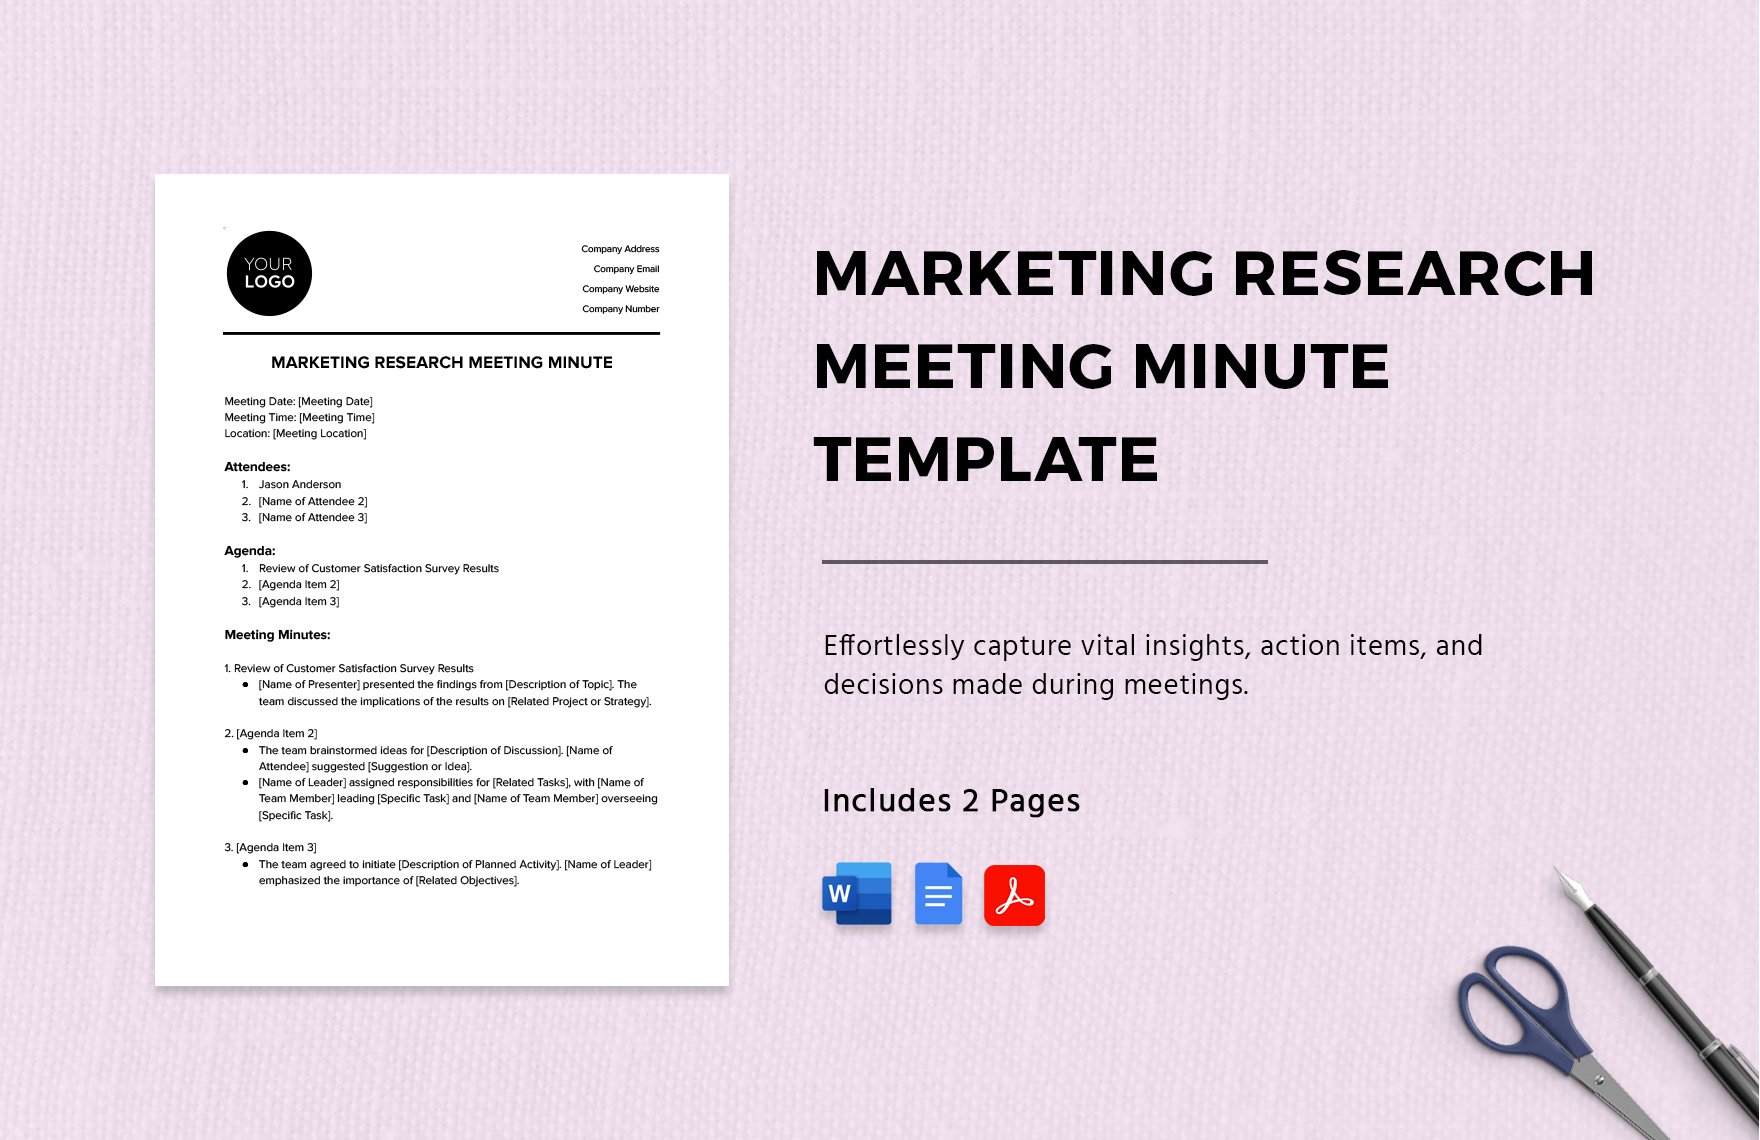 Marketing Research Meeting Minute Template in Word, Google Docs, PDF